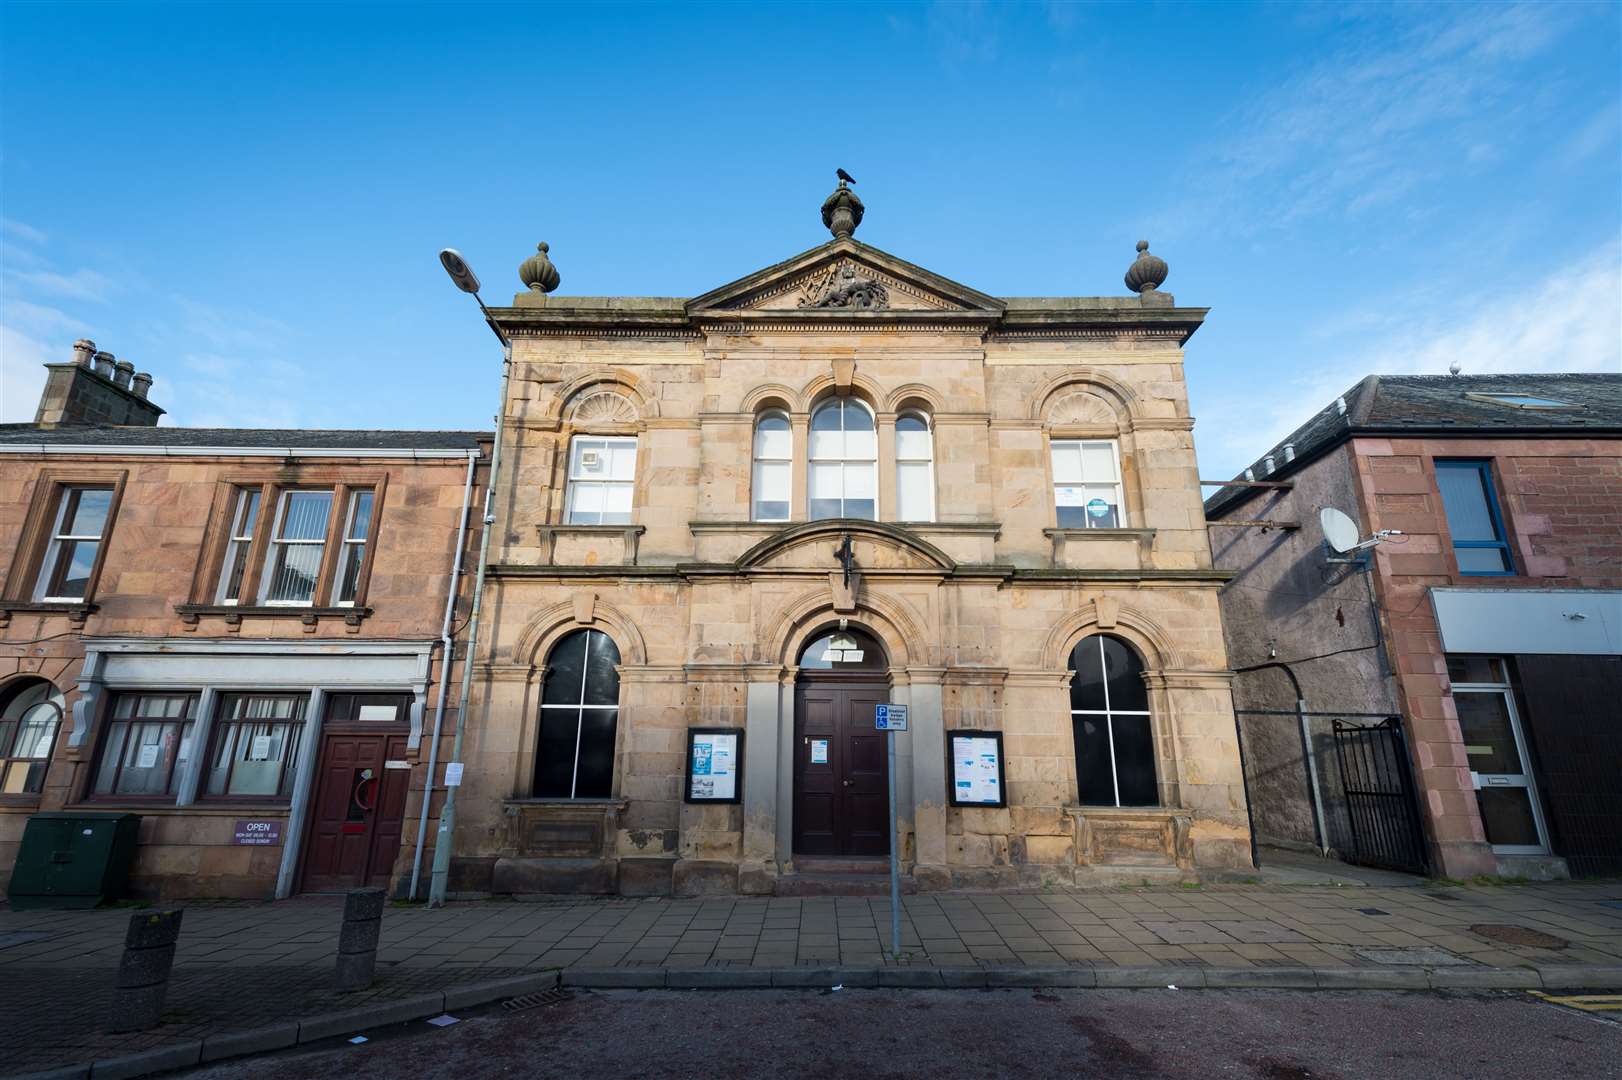 A number of efforts have been made to find a viable business plan for Invergordon Town hall which needs 'significant' refurbishment. A consultation on the proposed disposal of the common good asset will run until September 17.